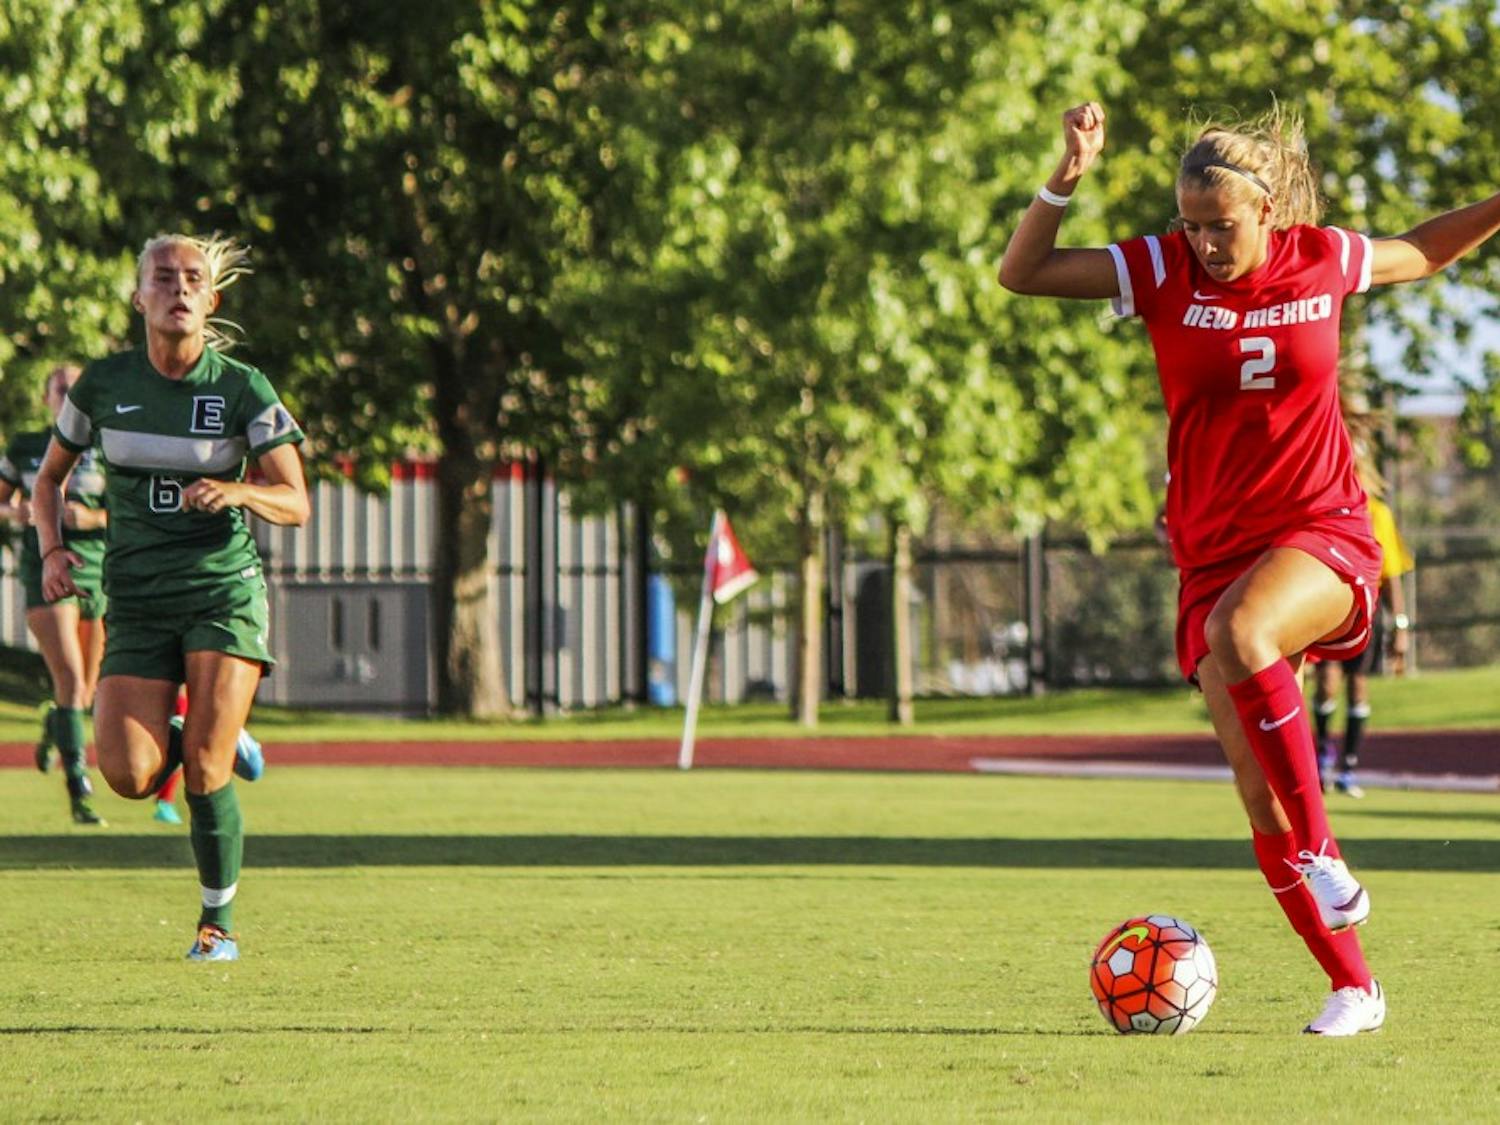 Redshirt senior midfielder Katie Hinman receives a pass Sunday, Aug. 14, 2016 at the UNM Soccer Complex. The Lobos will play Grand Canyon University in Flagstaff, Arizona on Friday at 4 p.m.